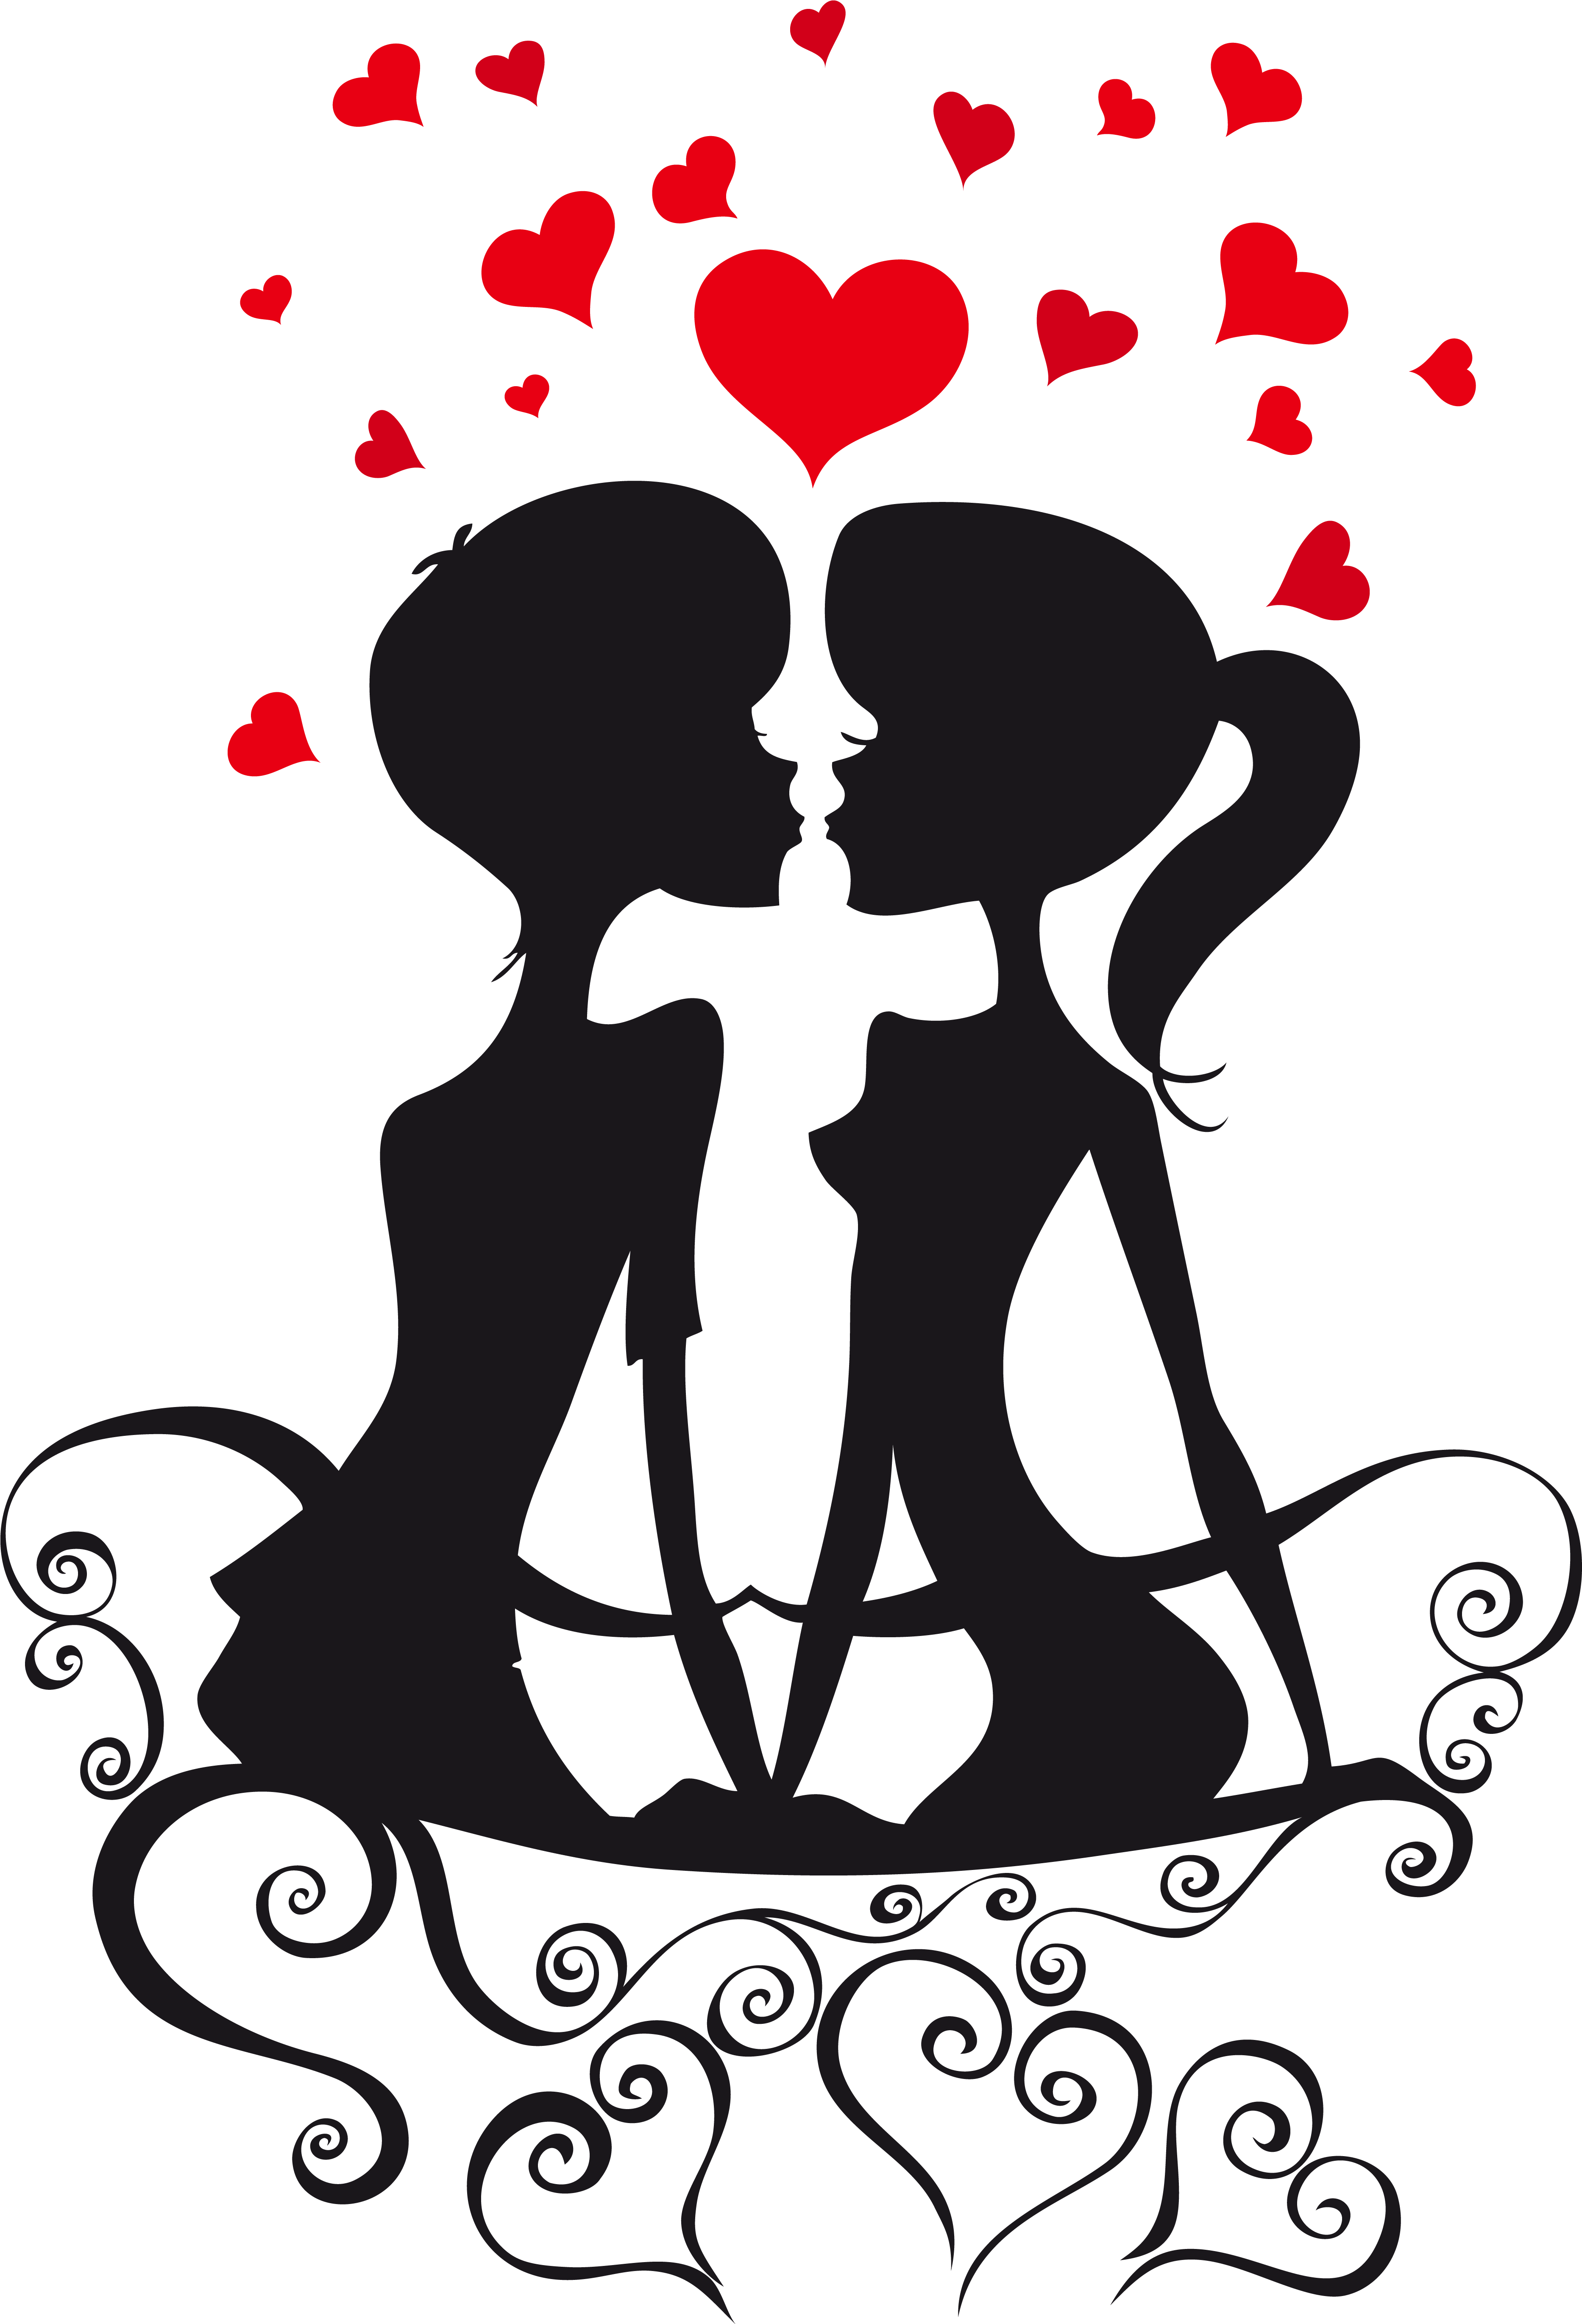 Pretty Looking Clip Art For Love Couple Silhouettes - Happy Monthsary (3843x5569)